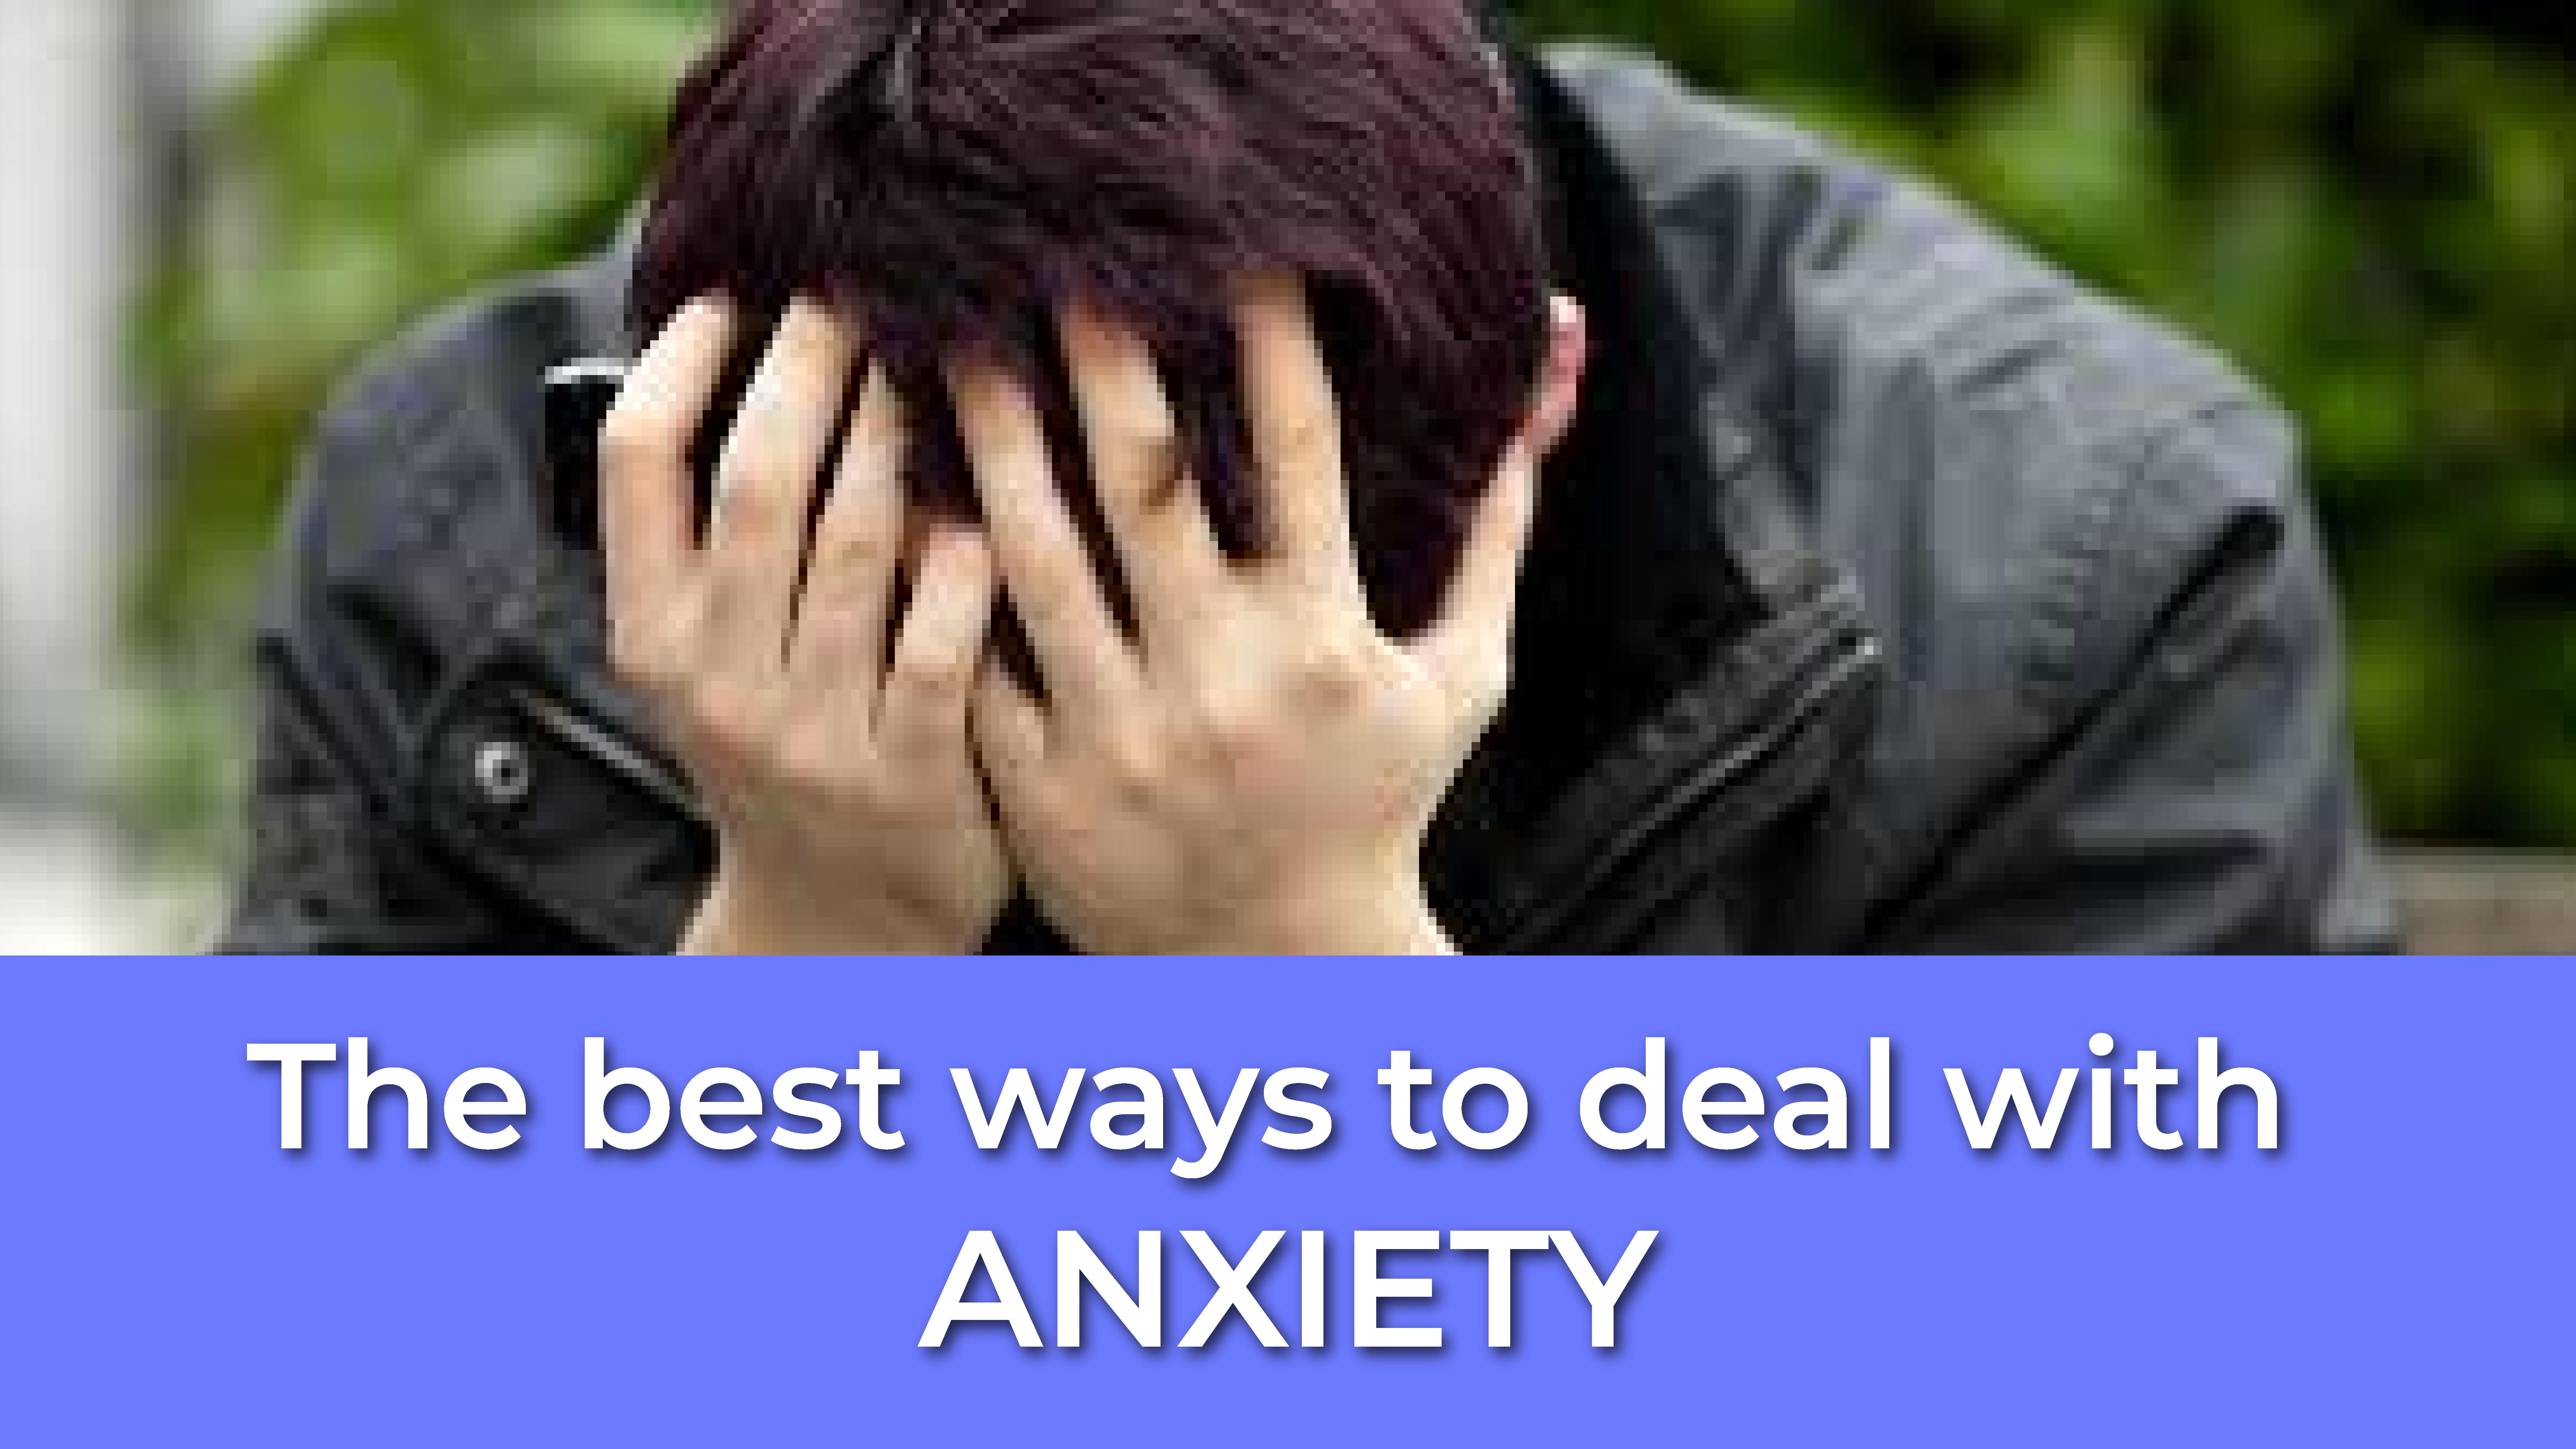 The best ways to deal with anxiety